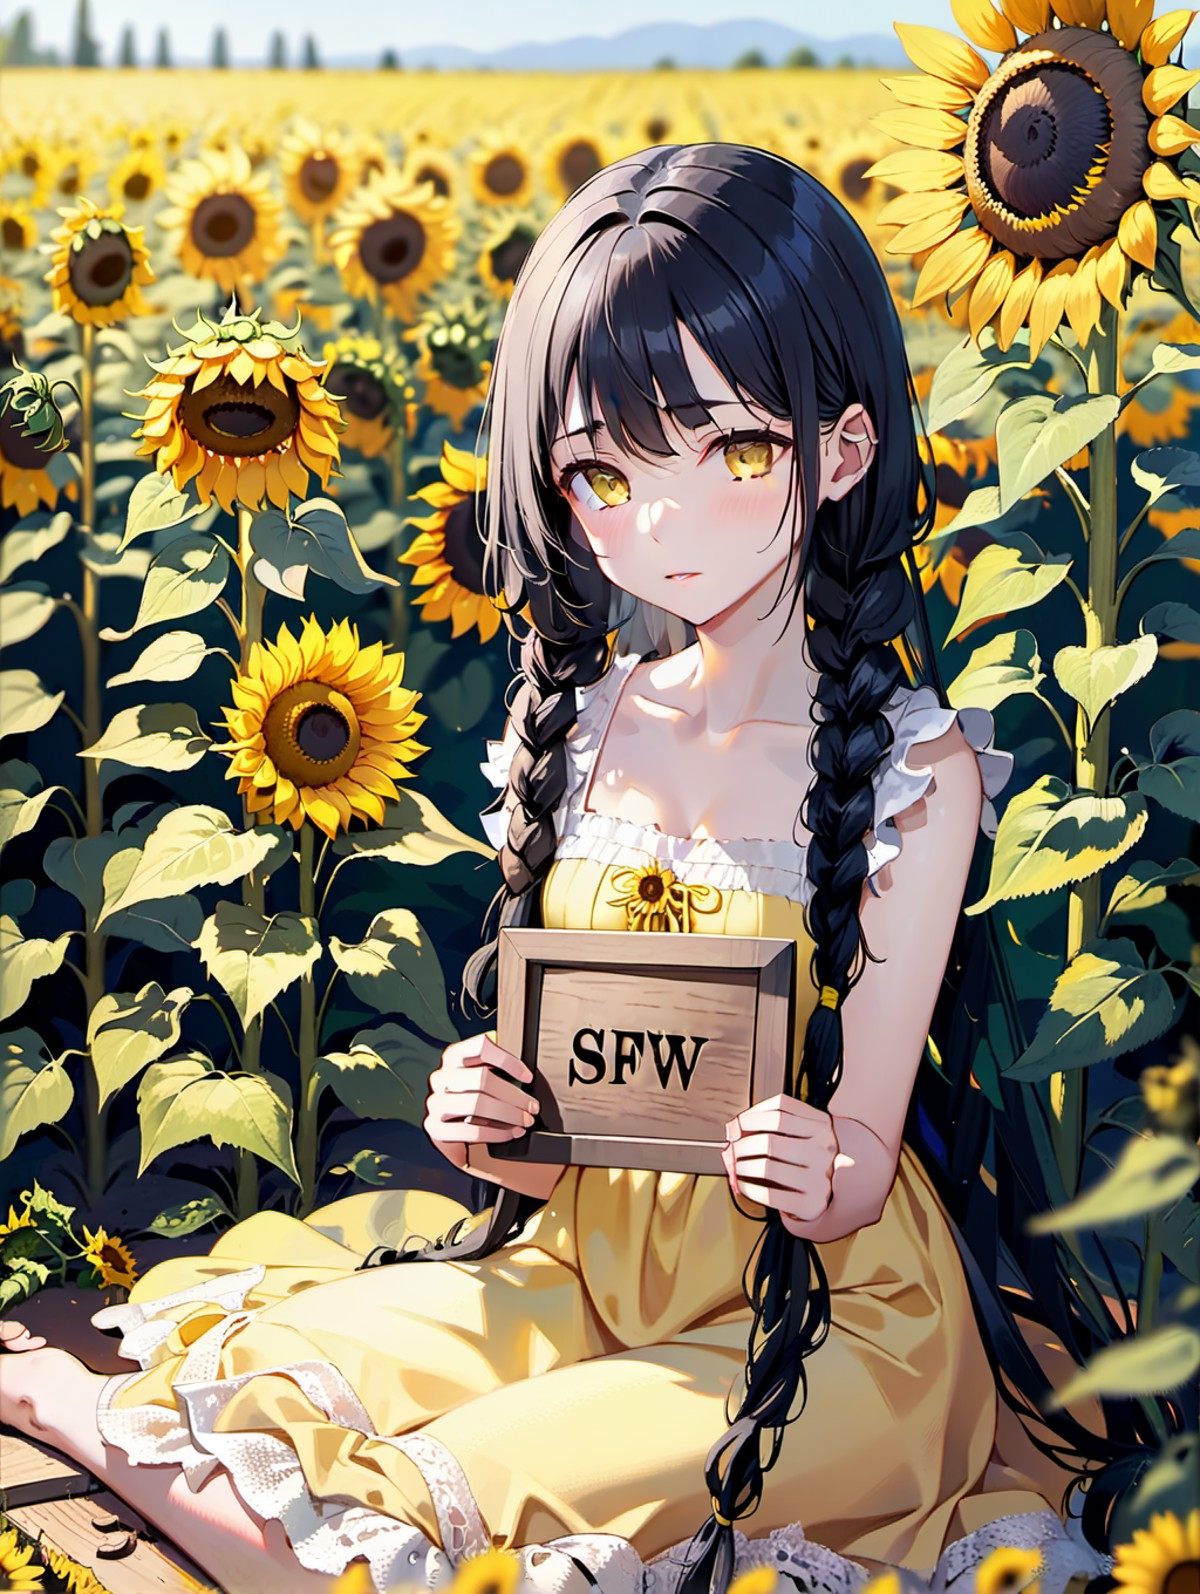 A young girl with long black hair in braids sitting pensively in a sunny flower field of yellow sunflowers. She is wearing...